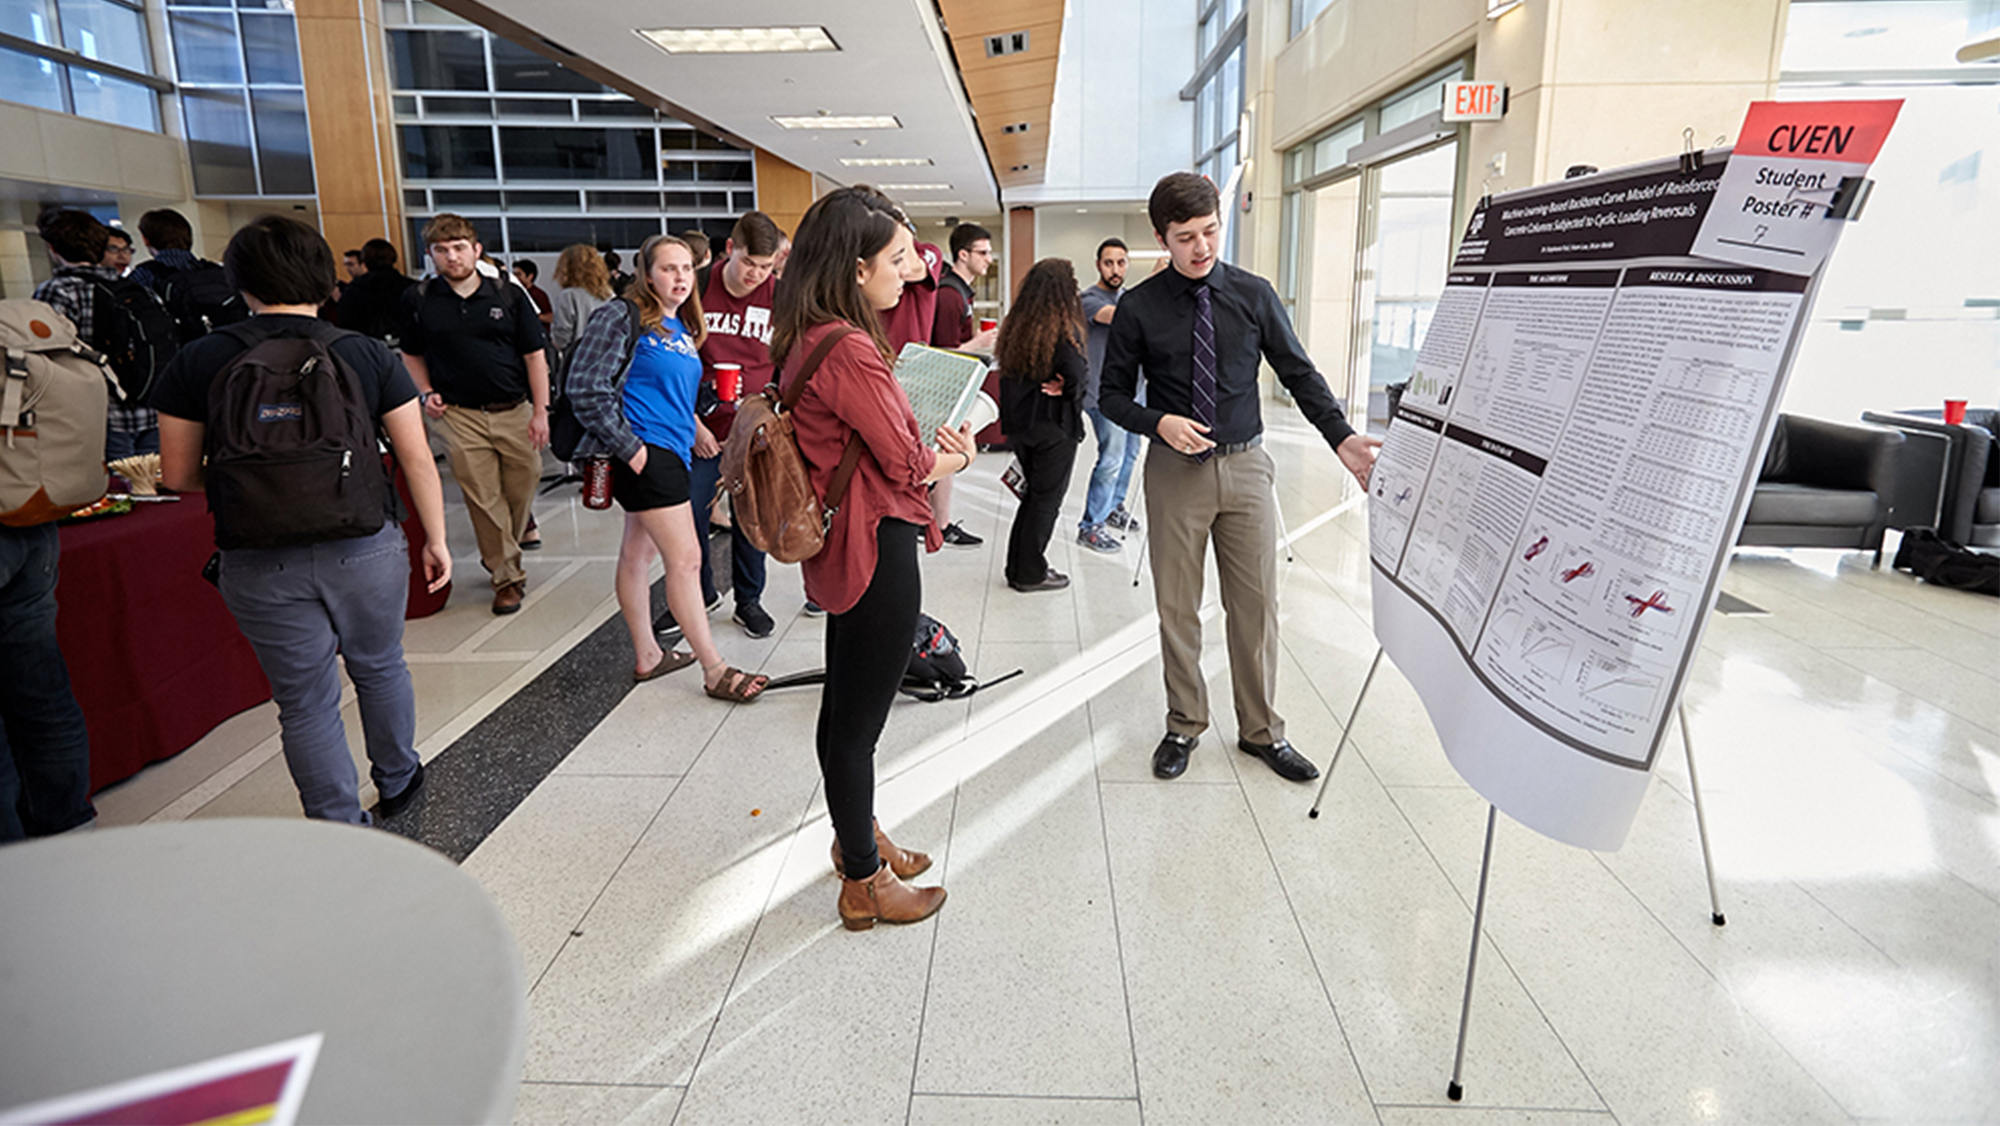 Student presents his research poster